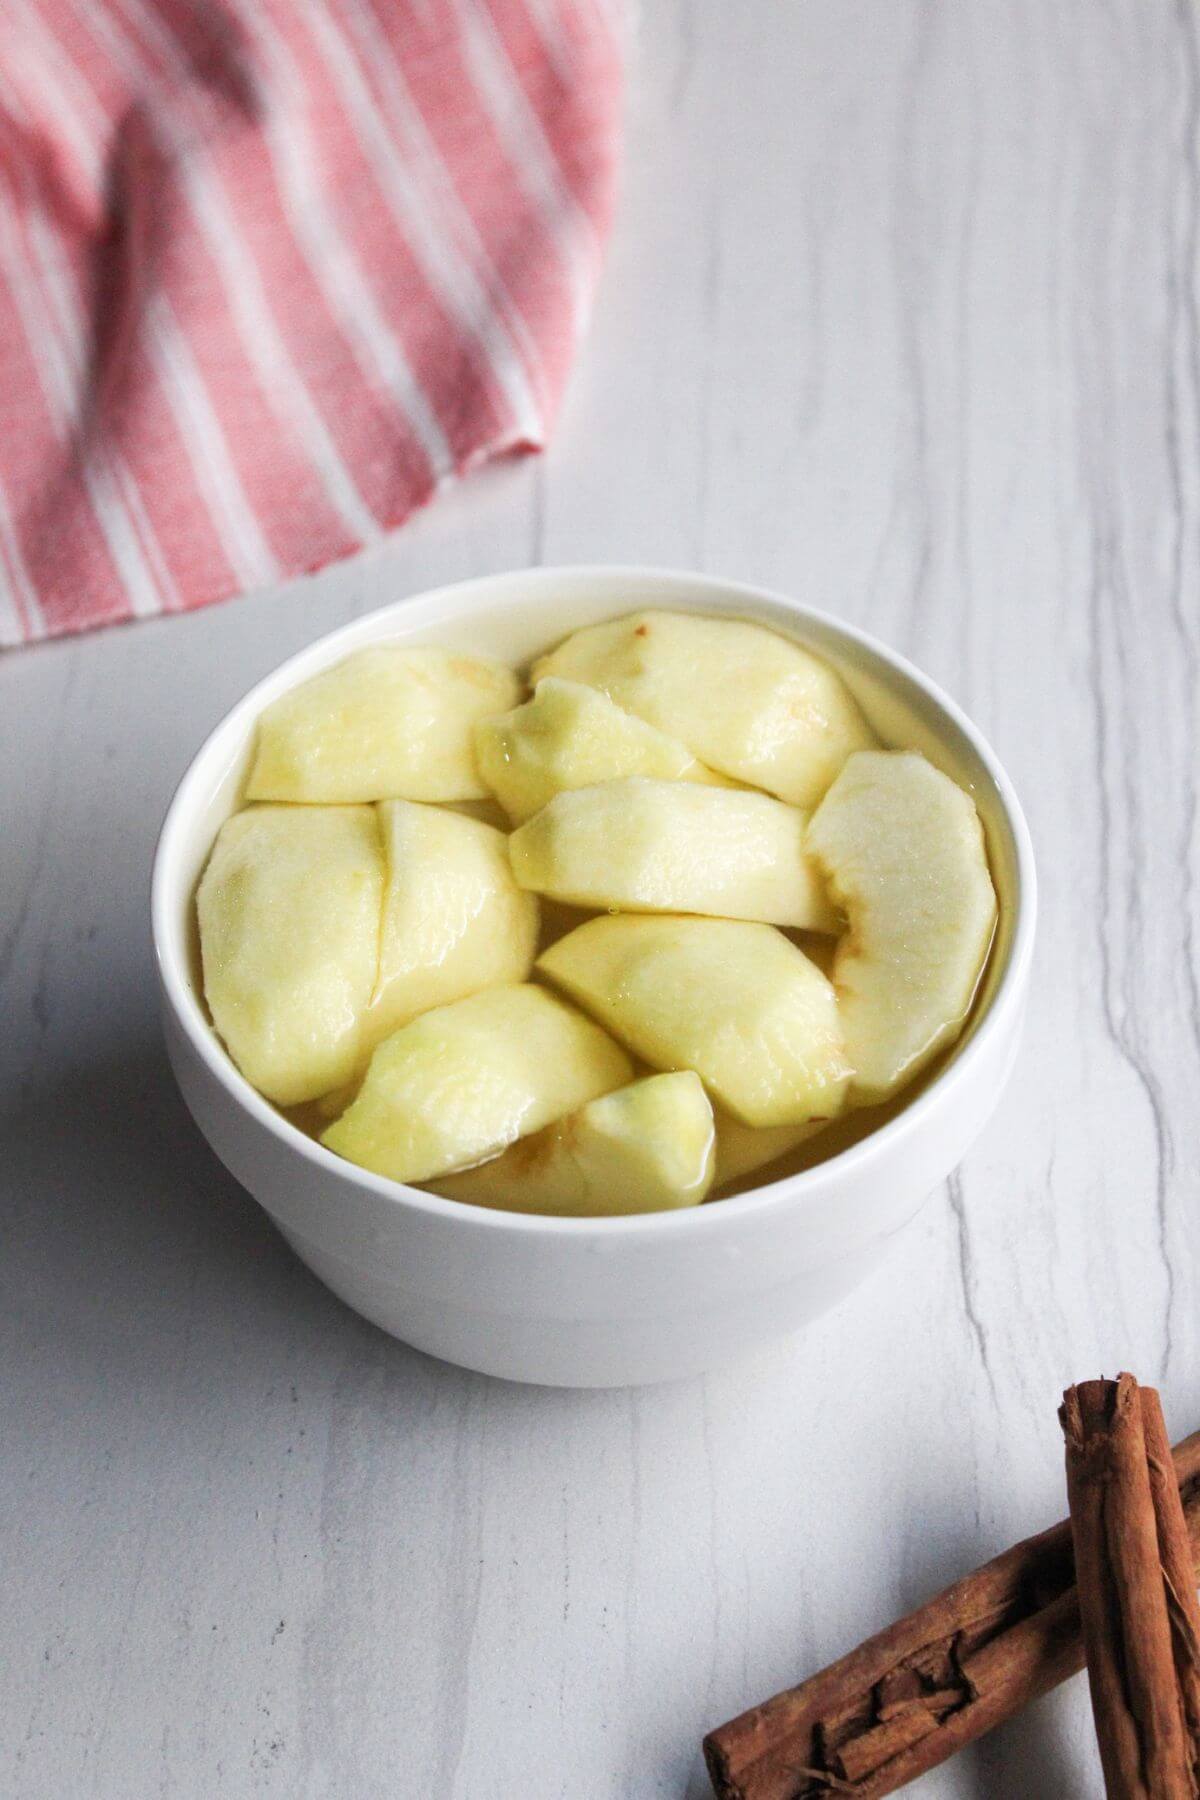 Apple slices in bowl of water.